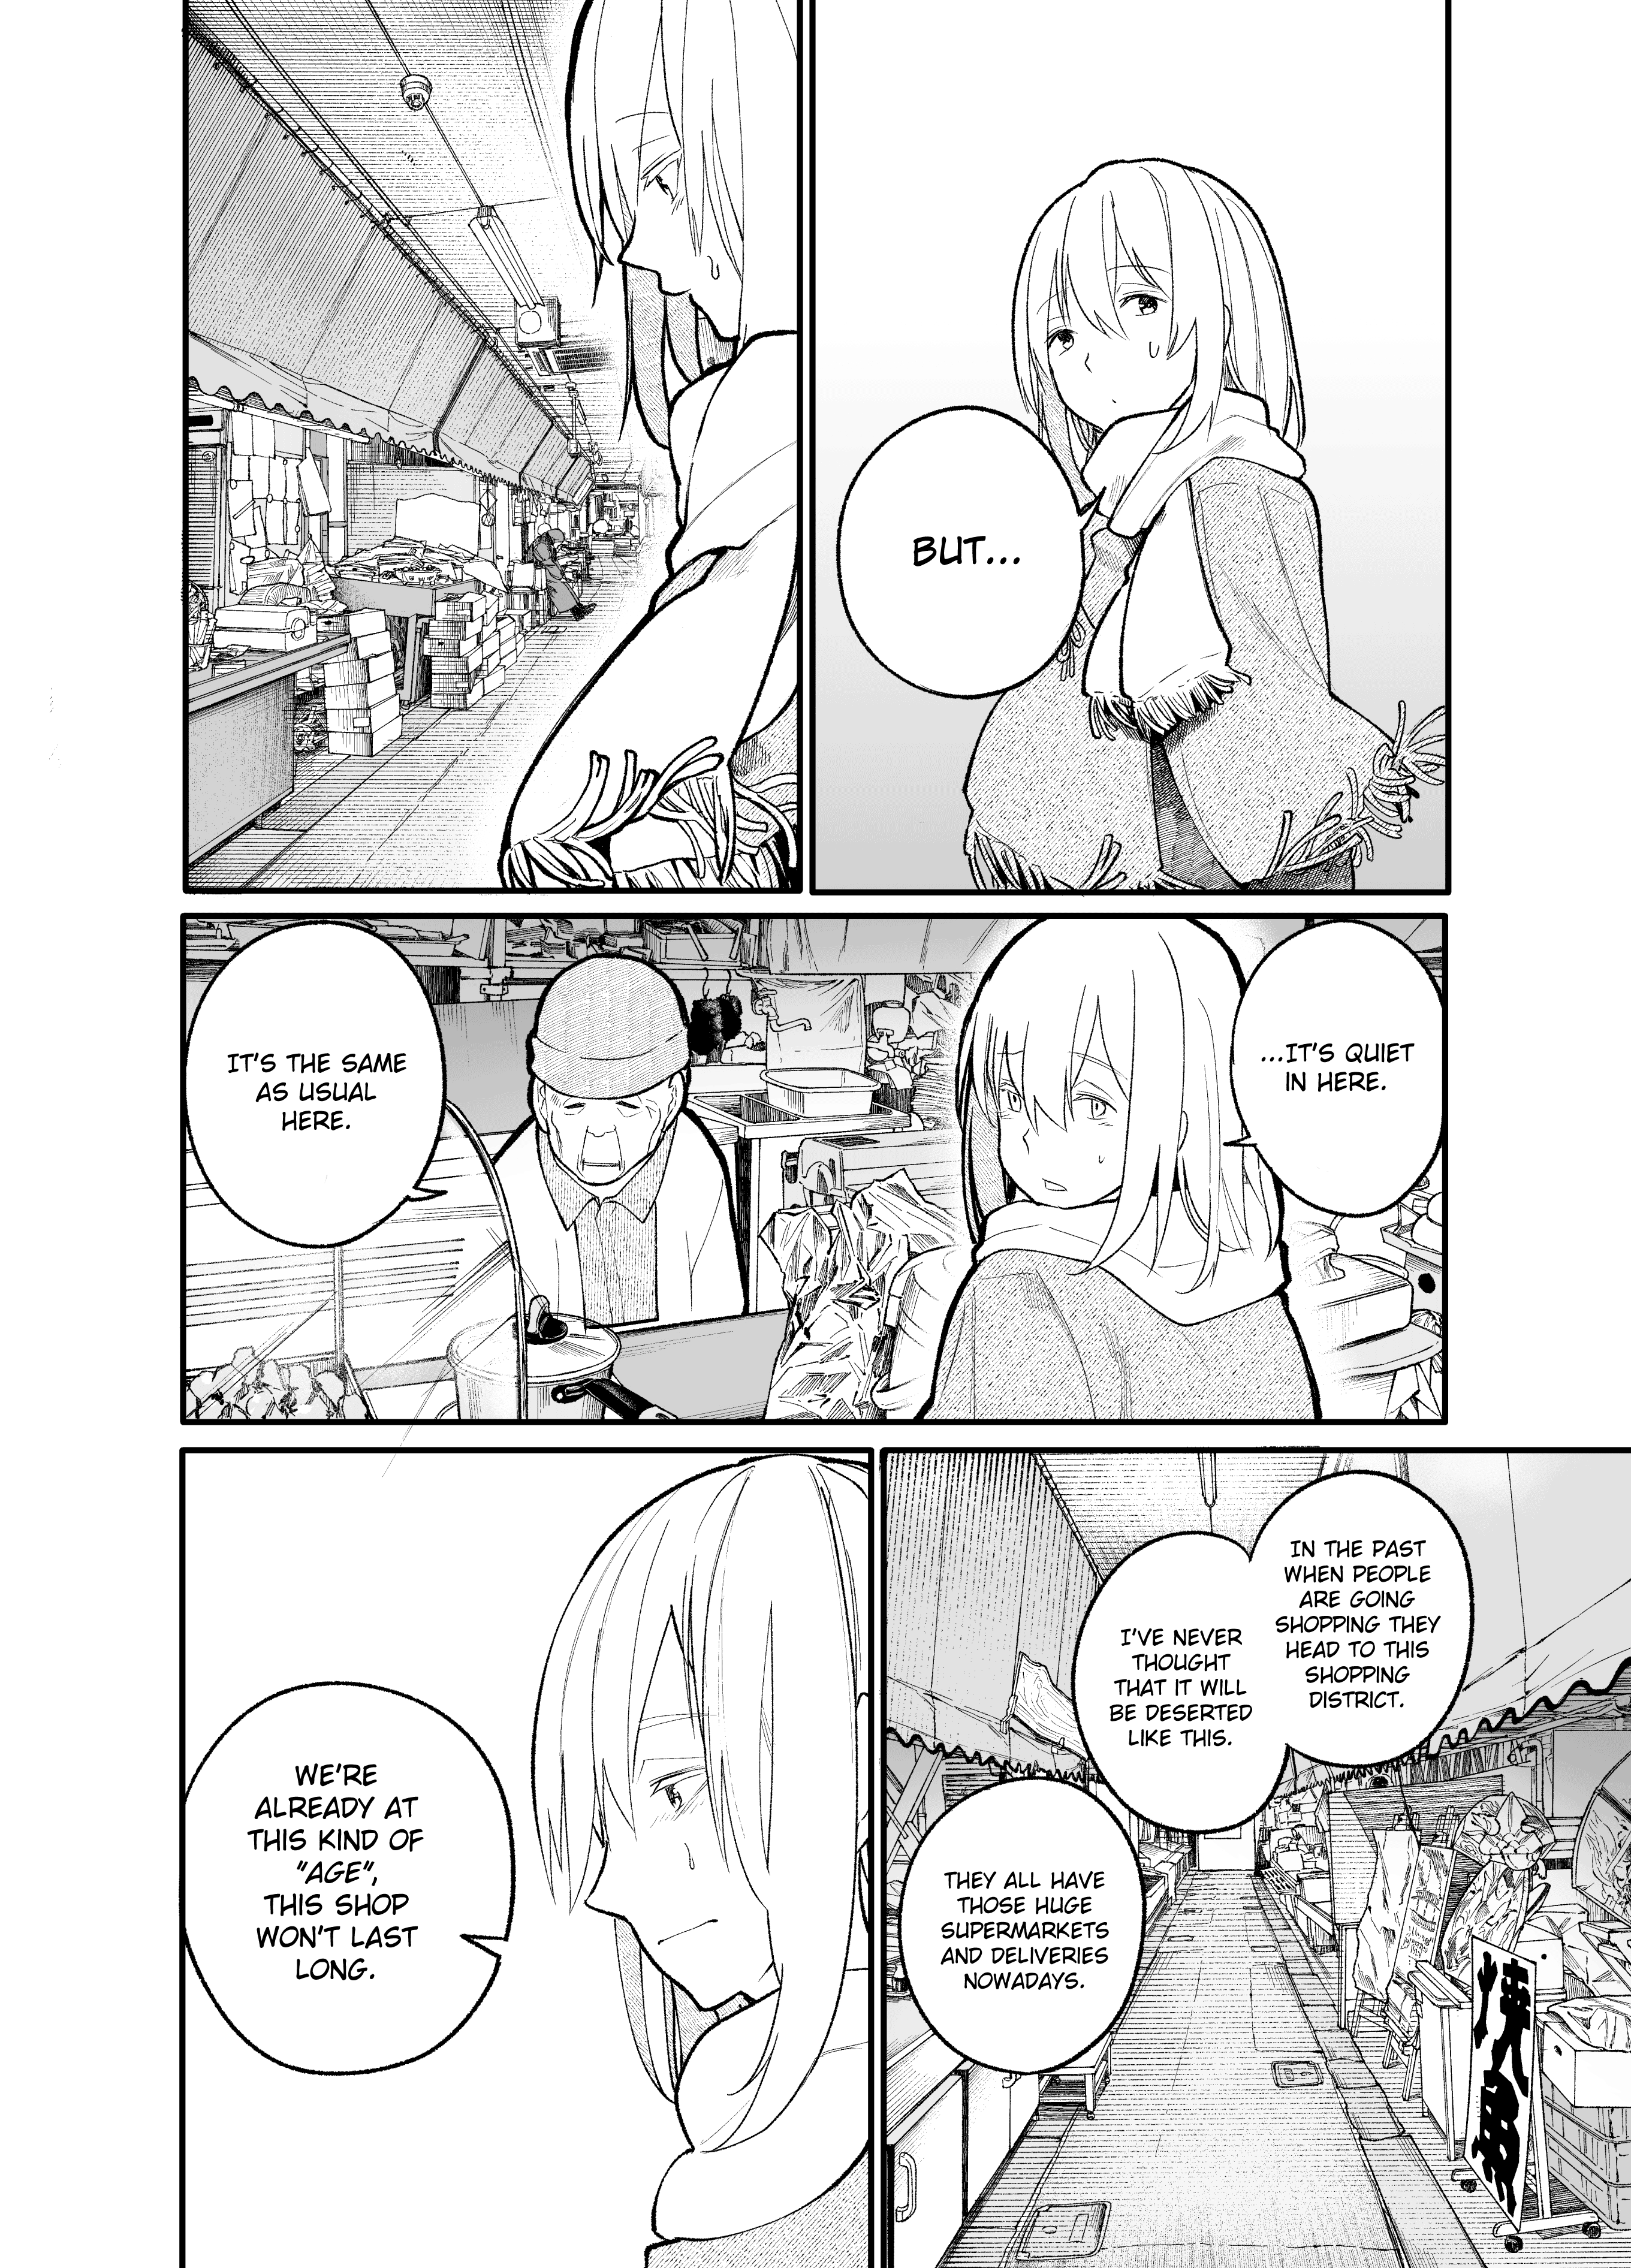 A Story About A Grandpa And Grandma Who Returned Back To Their Youth - 20 page 2-19868e81